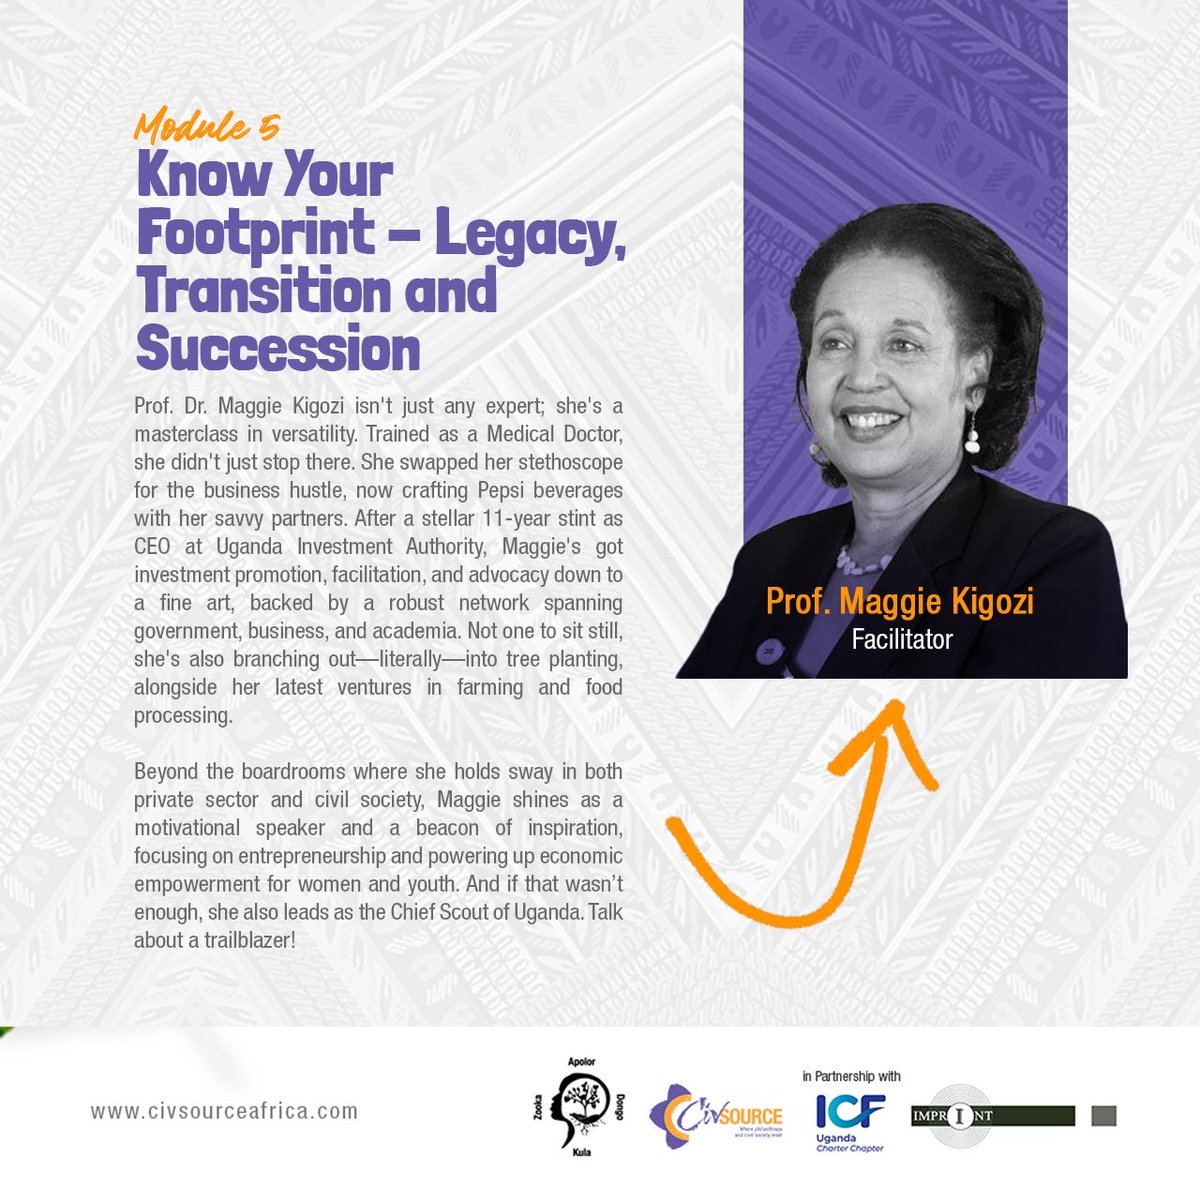 🪴The GROW¡ That Was! Celebrating an incredible facilitation today by the one and only @MaggieKigozi3 . Her expertise in Know Your Footprint - Legacy, Transition and Succession is truly unparalleled. Thank you for inspiring us all with your wisdom and passion! #legacybuilders